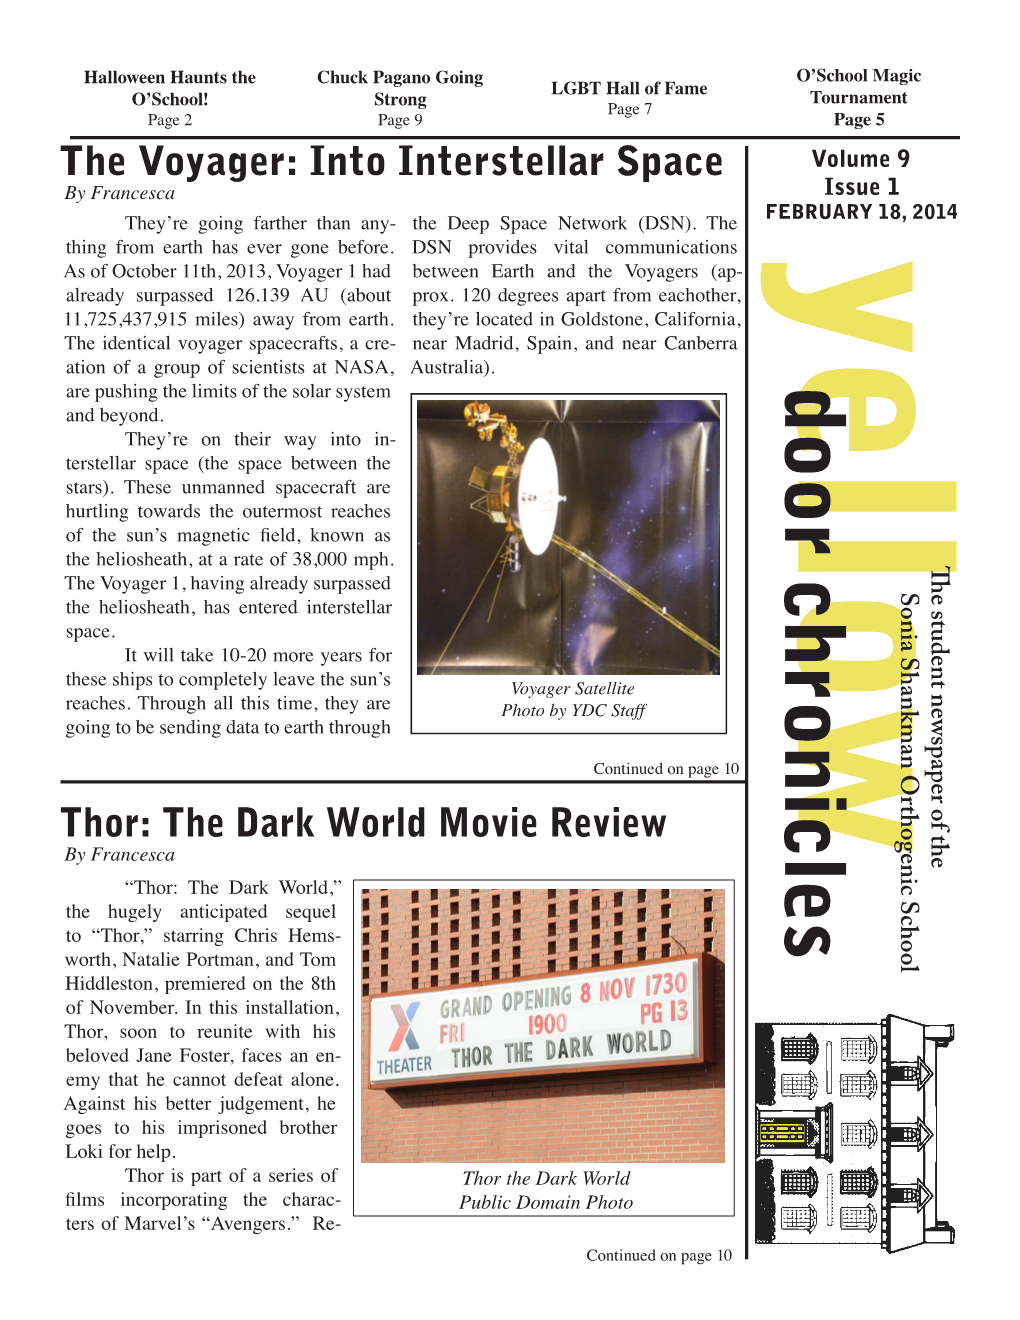 Thor: the Dark World Movie Review the Voyager: Into Interstellar Space